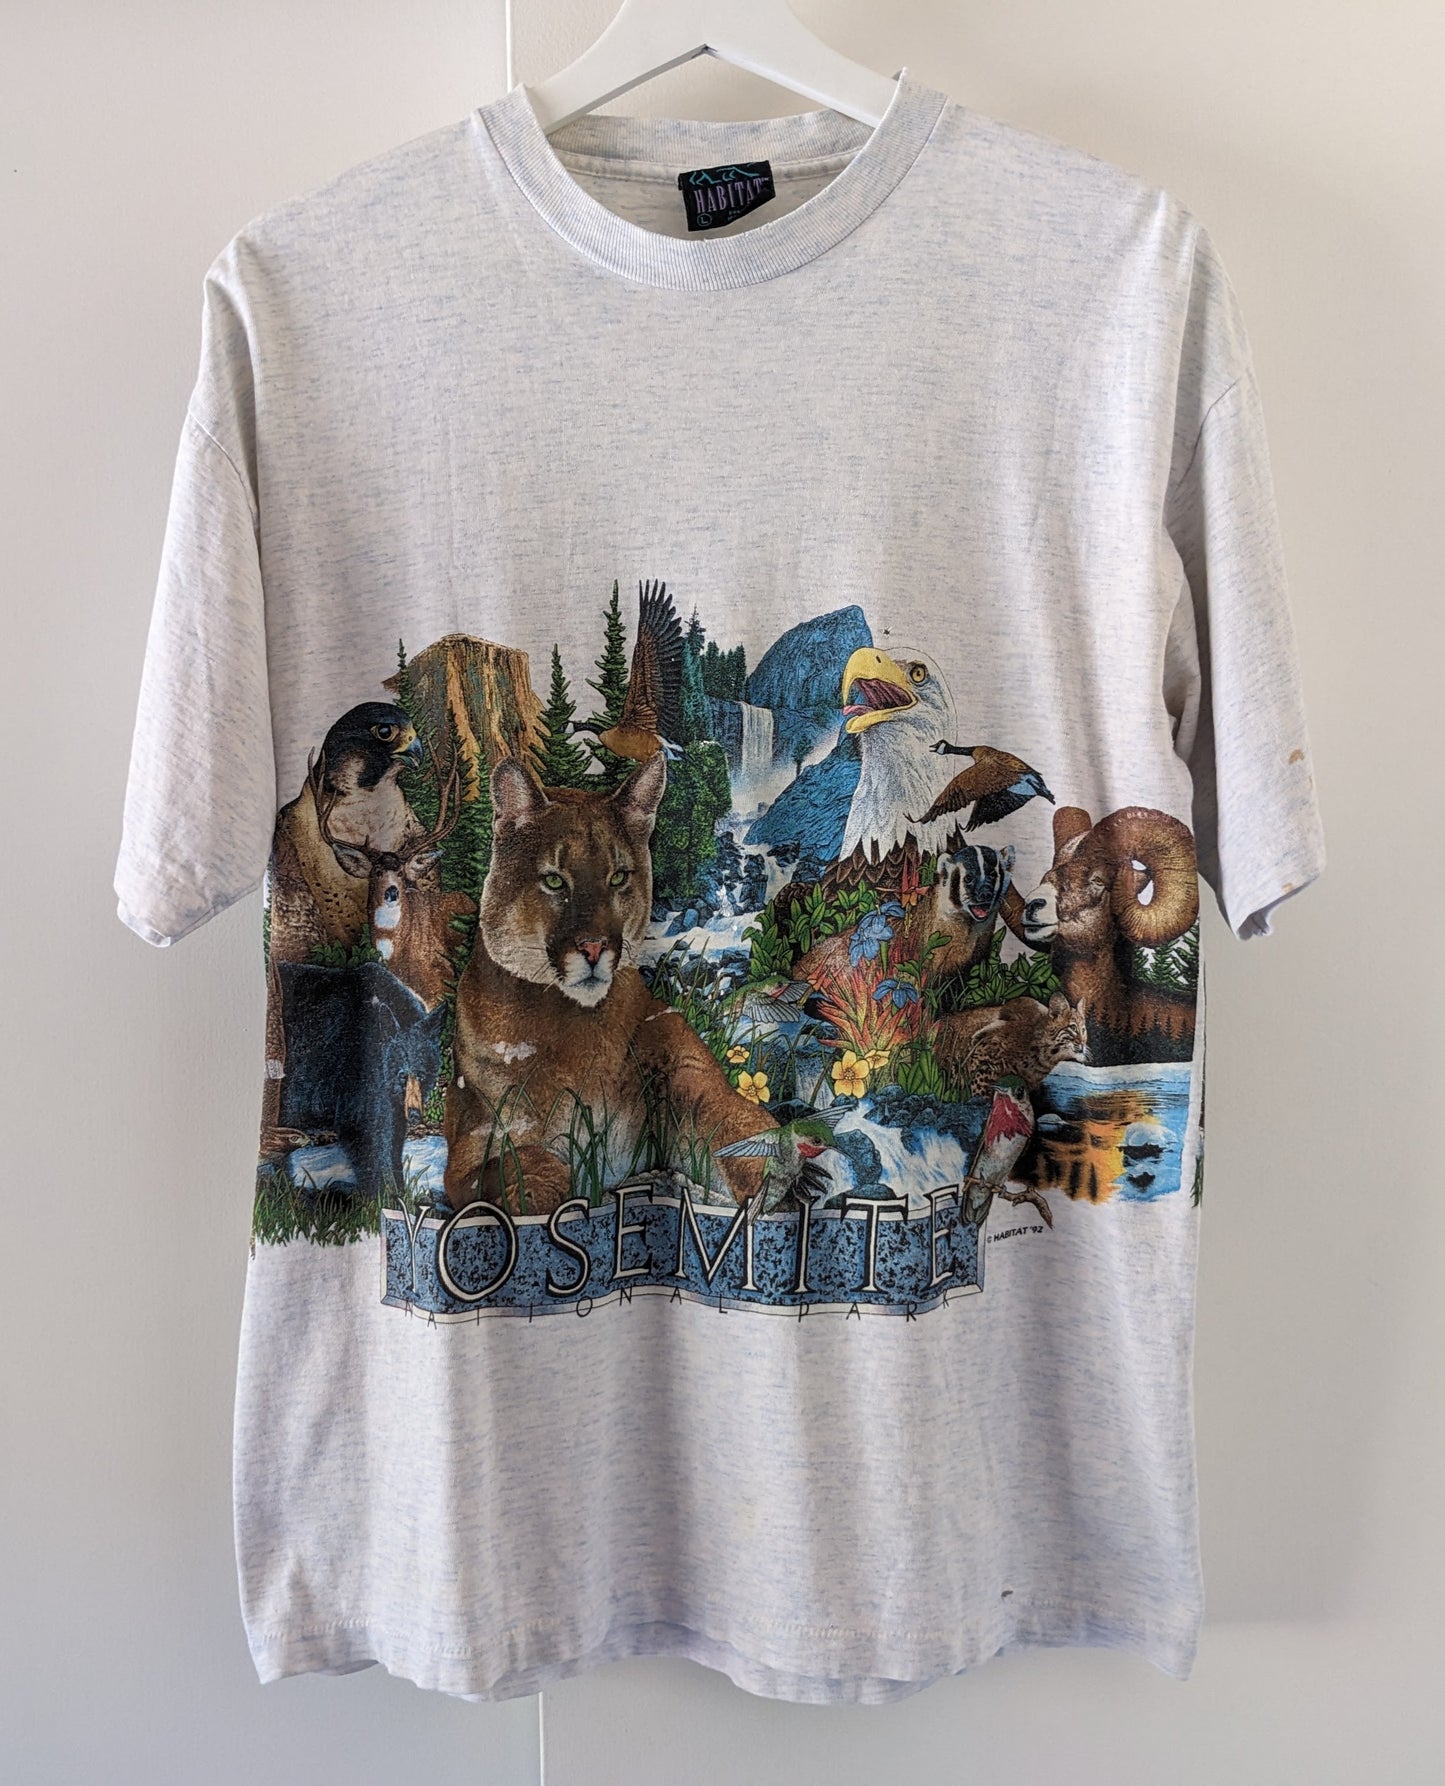 Heather gray Yosemite Habitat shirt with mountain lion, eagle, deer and more animals